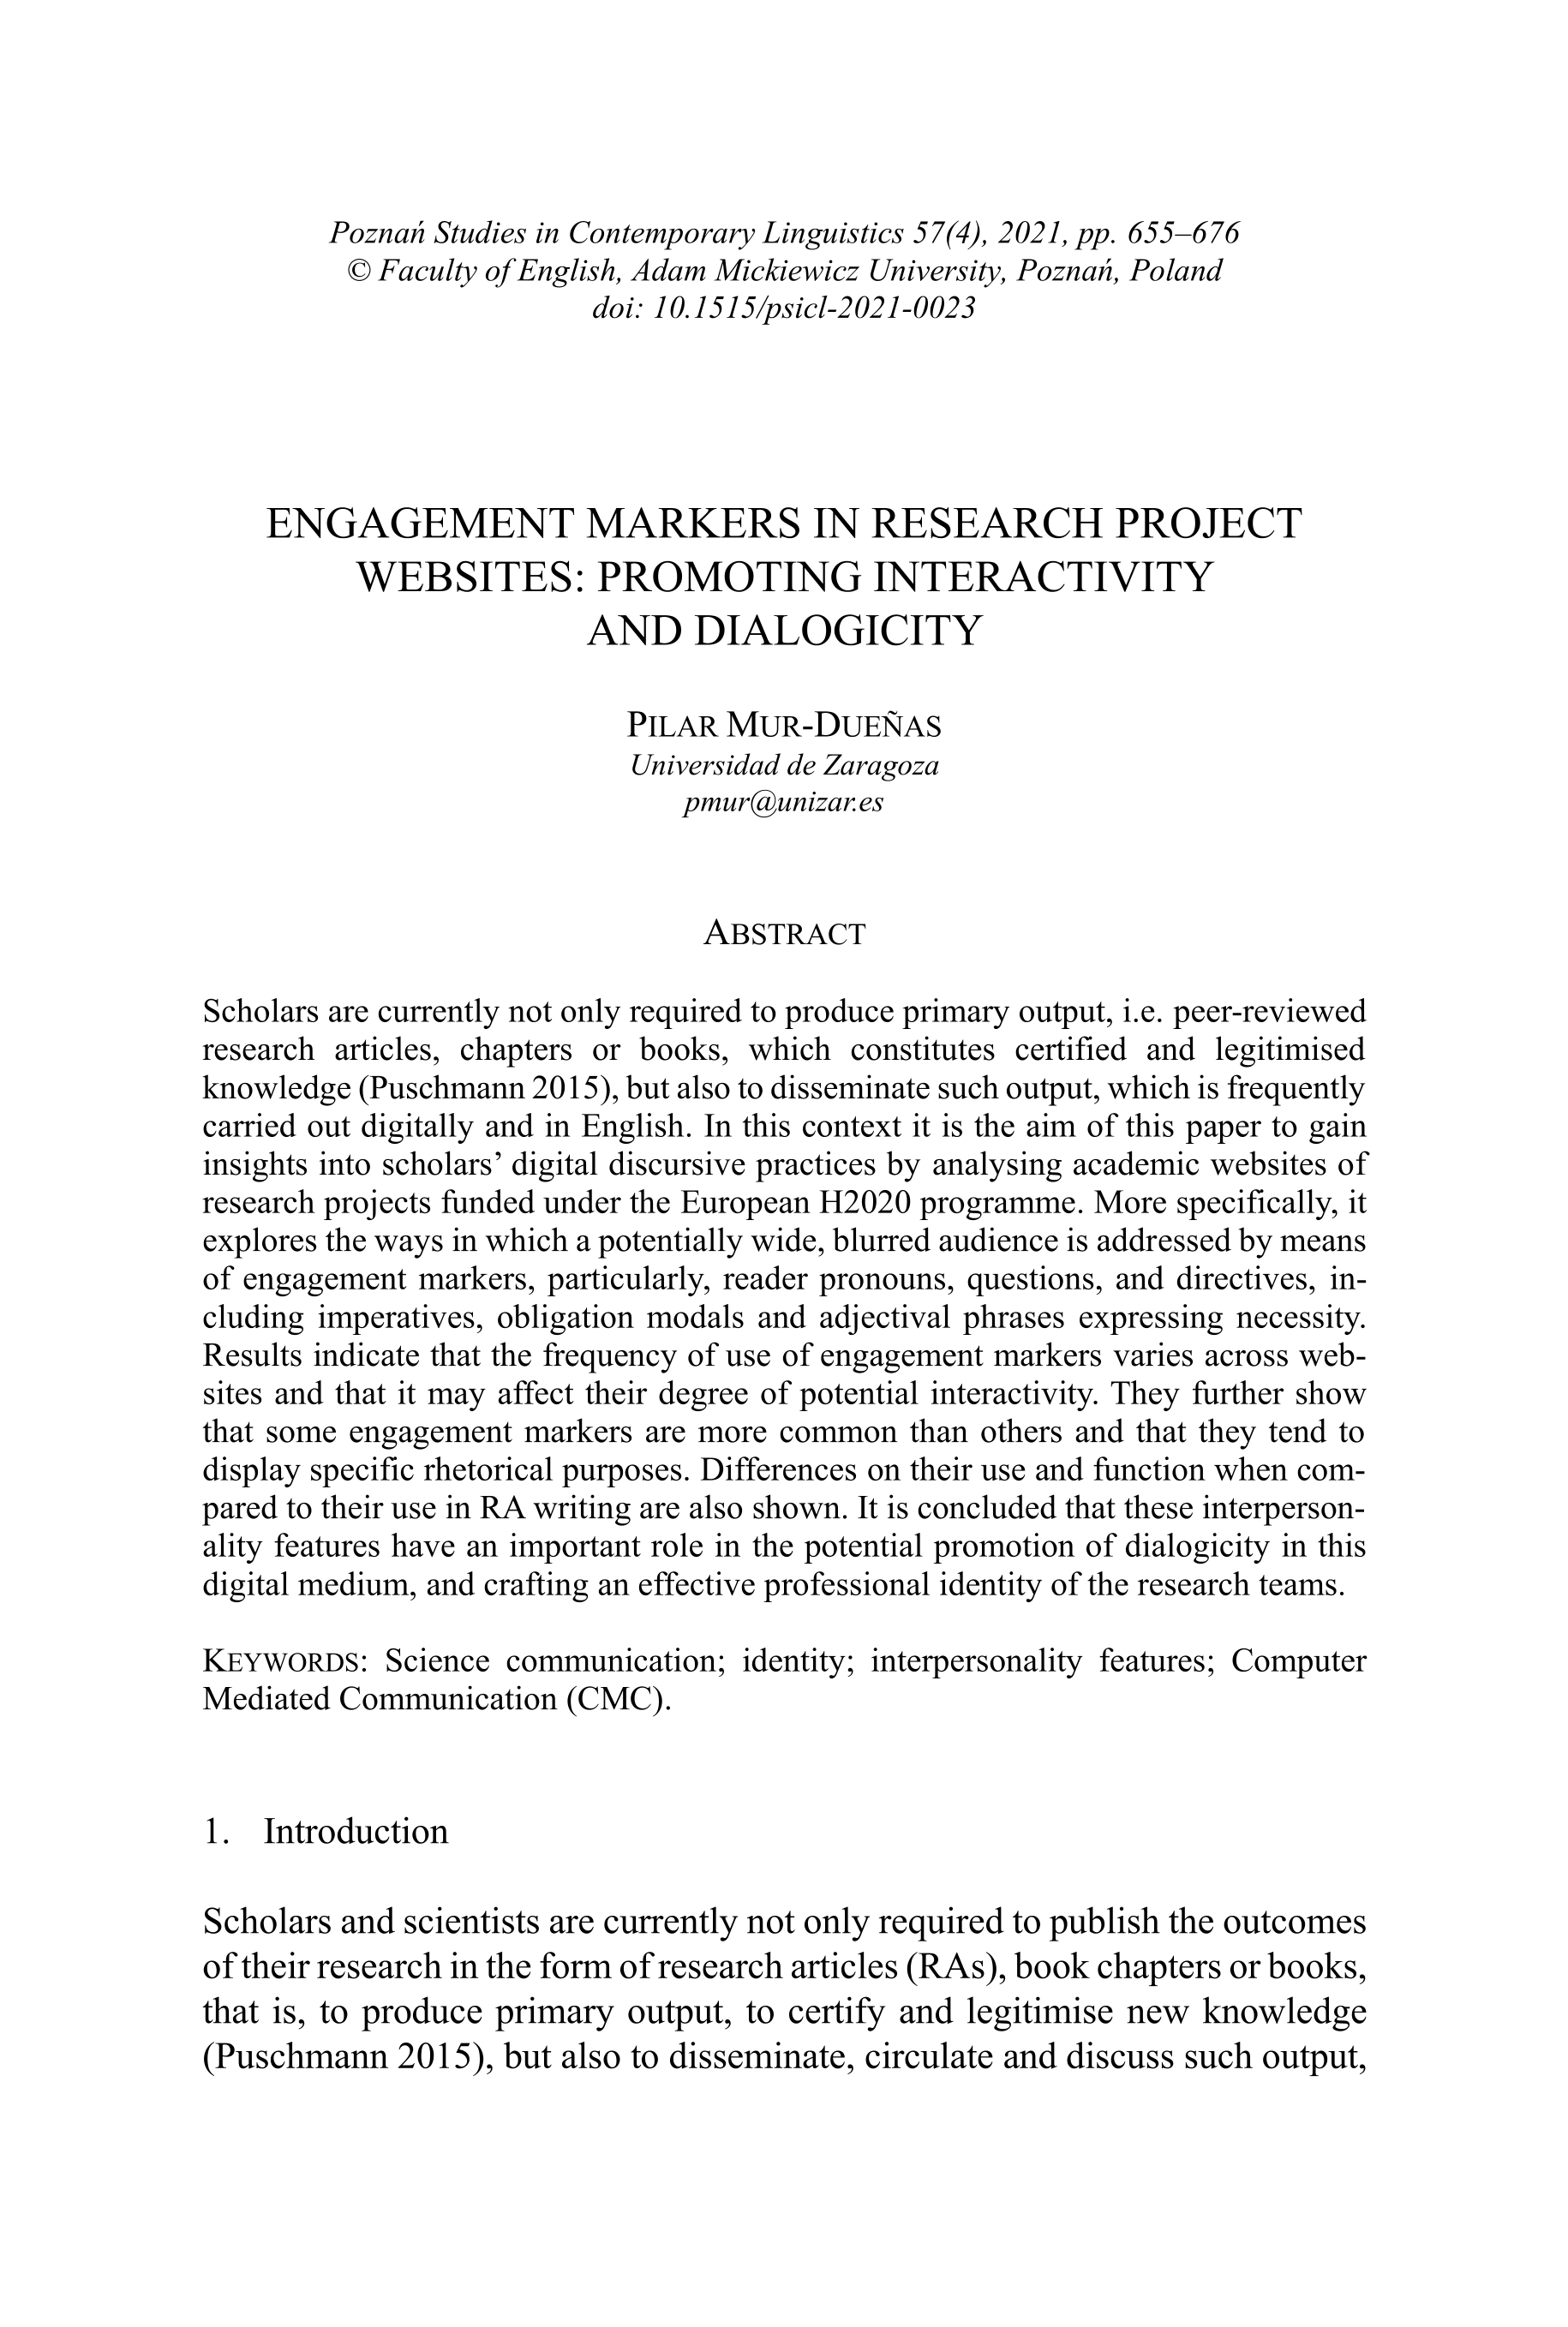 Engagement markers in research project websites: Promoting interactivity and dialogicity